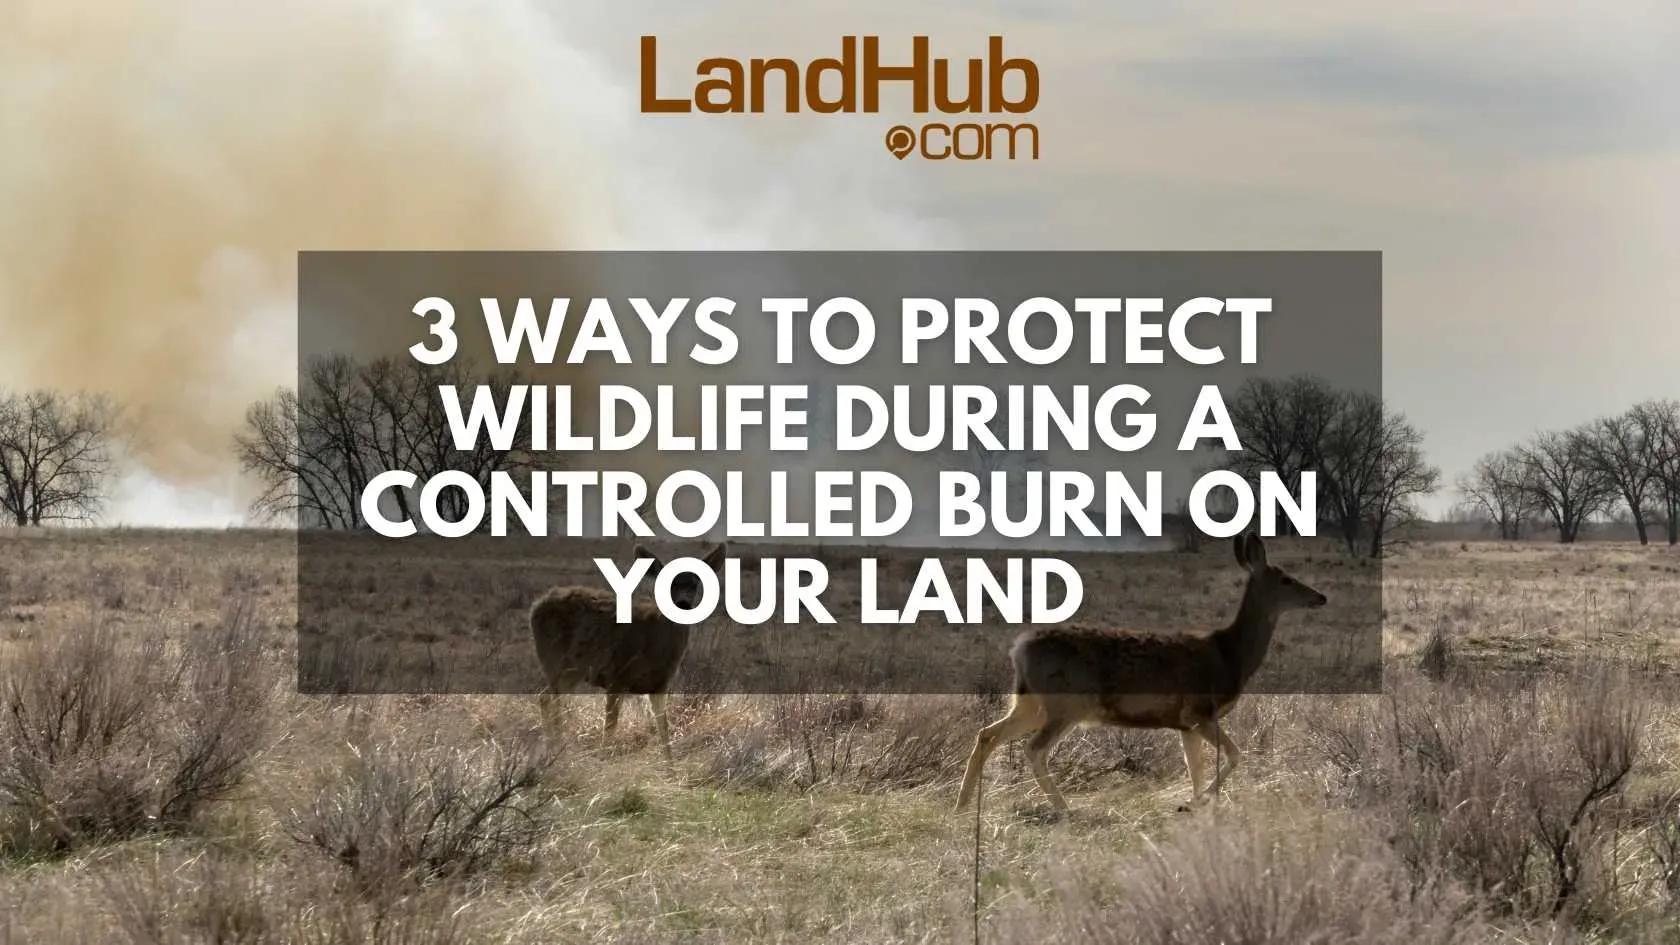 3 ways to protect wildlife during a controlled burn on your land